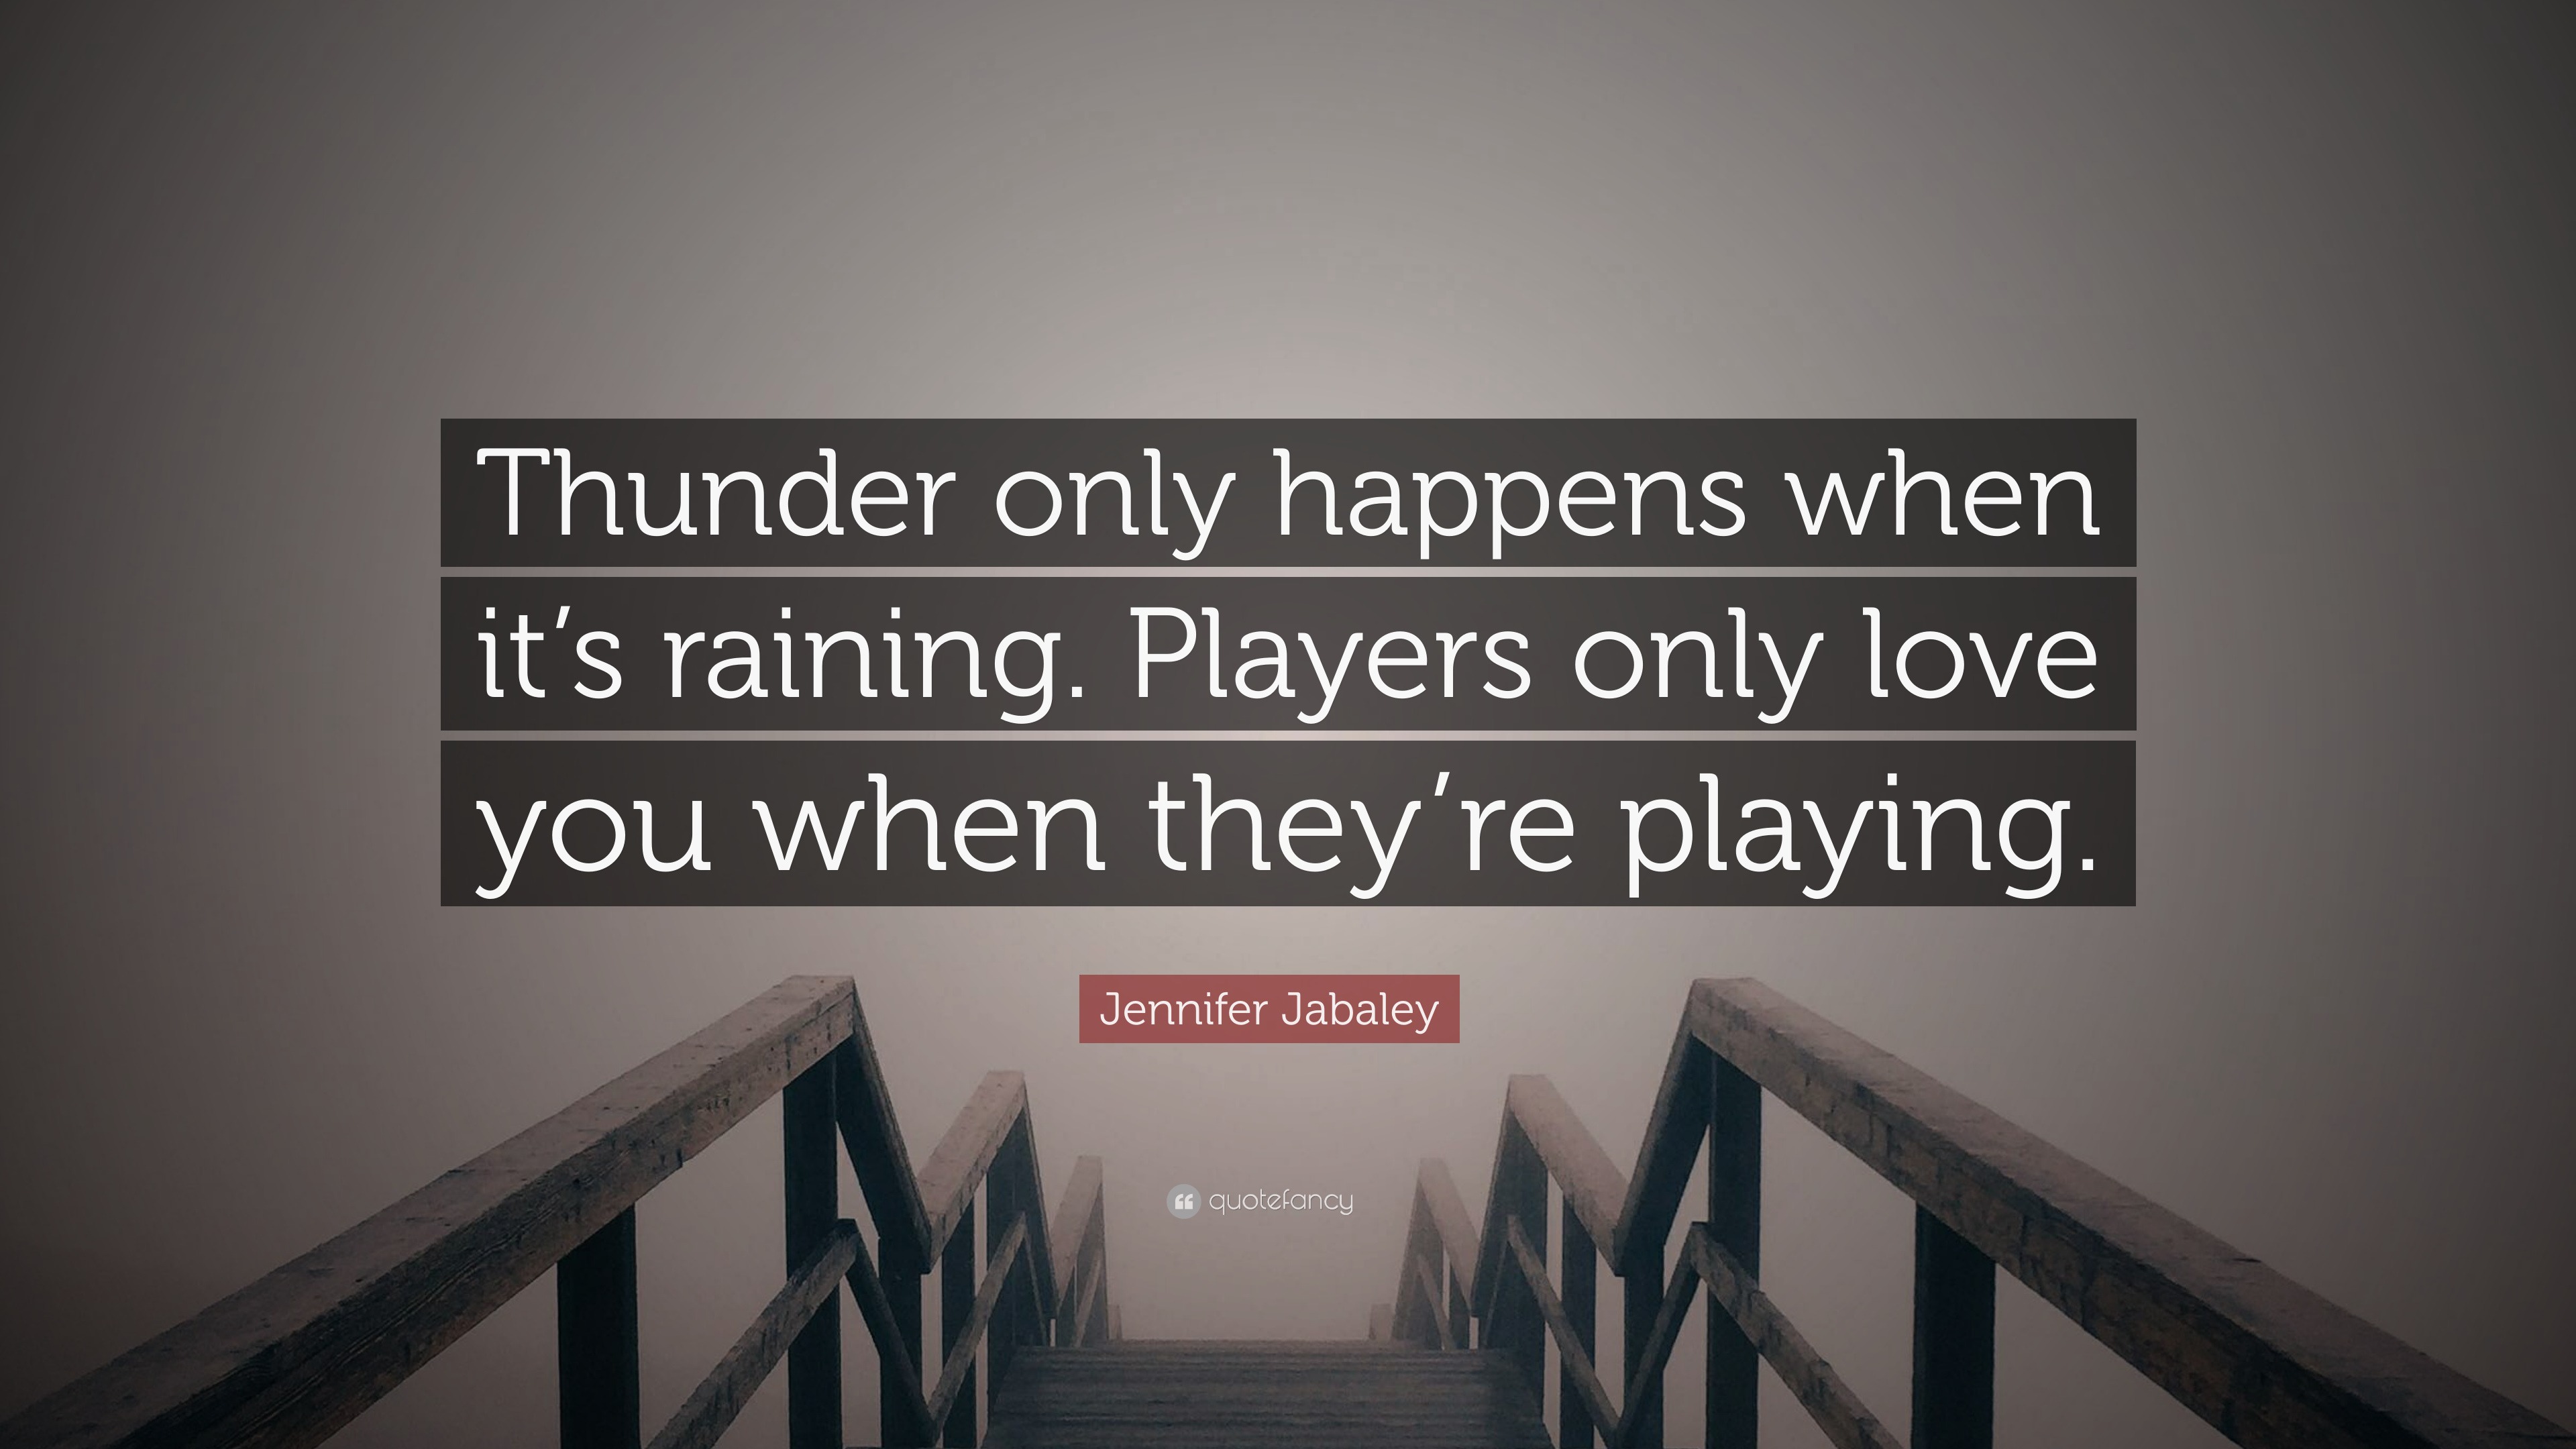 Jennifer Jabaley Quote “Thunder only happens when it s raining Players only love you